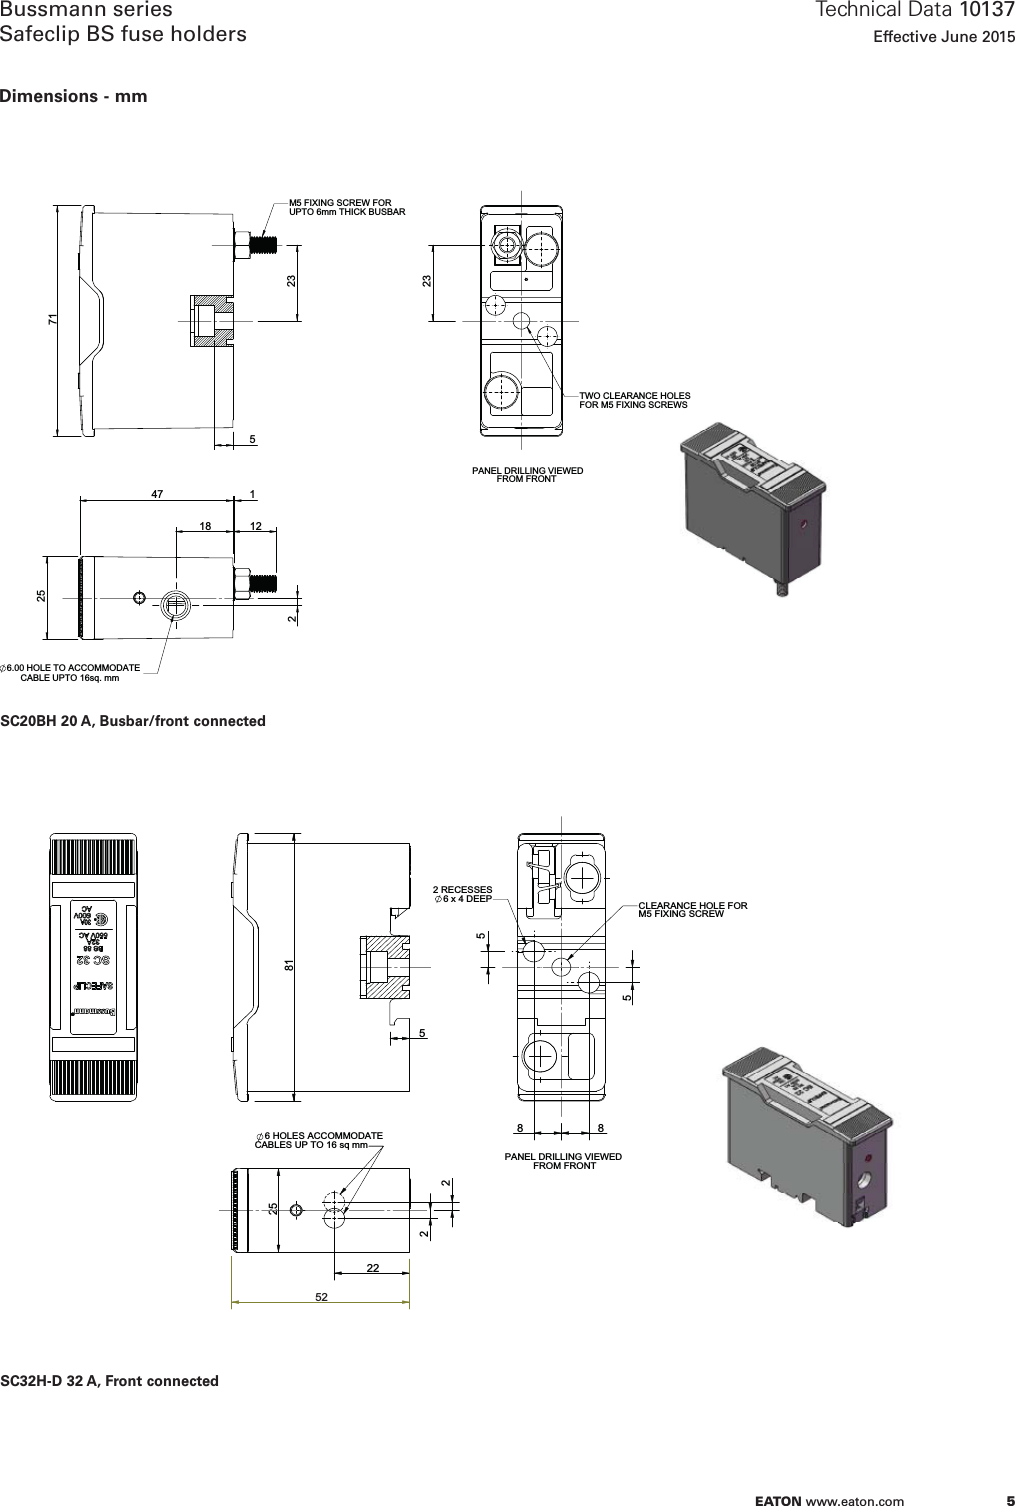 Page 5 of 10 - Bus-iec-ds-10137-safeclipfuseholders  Brochure